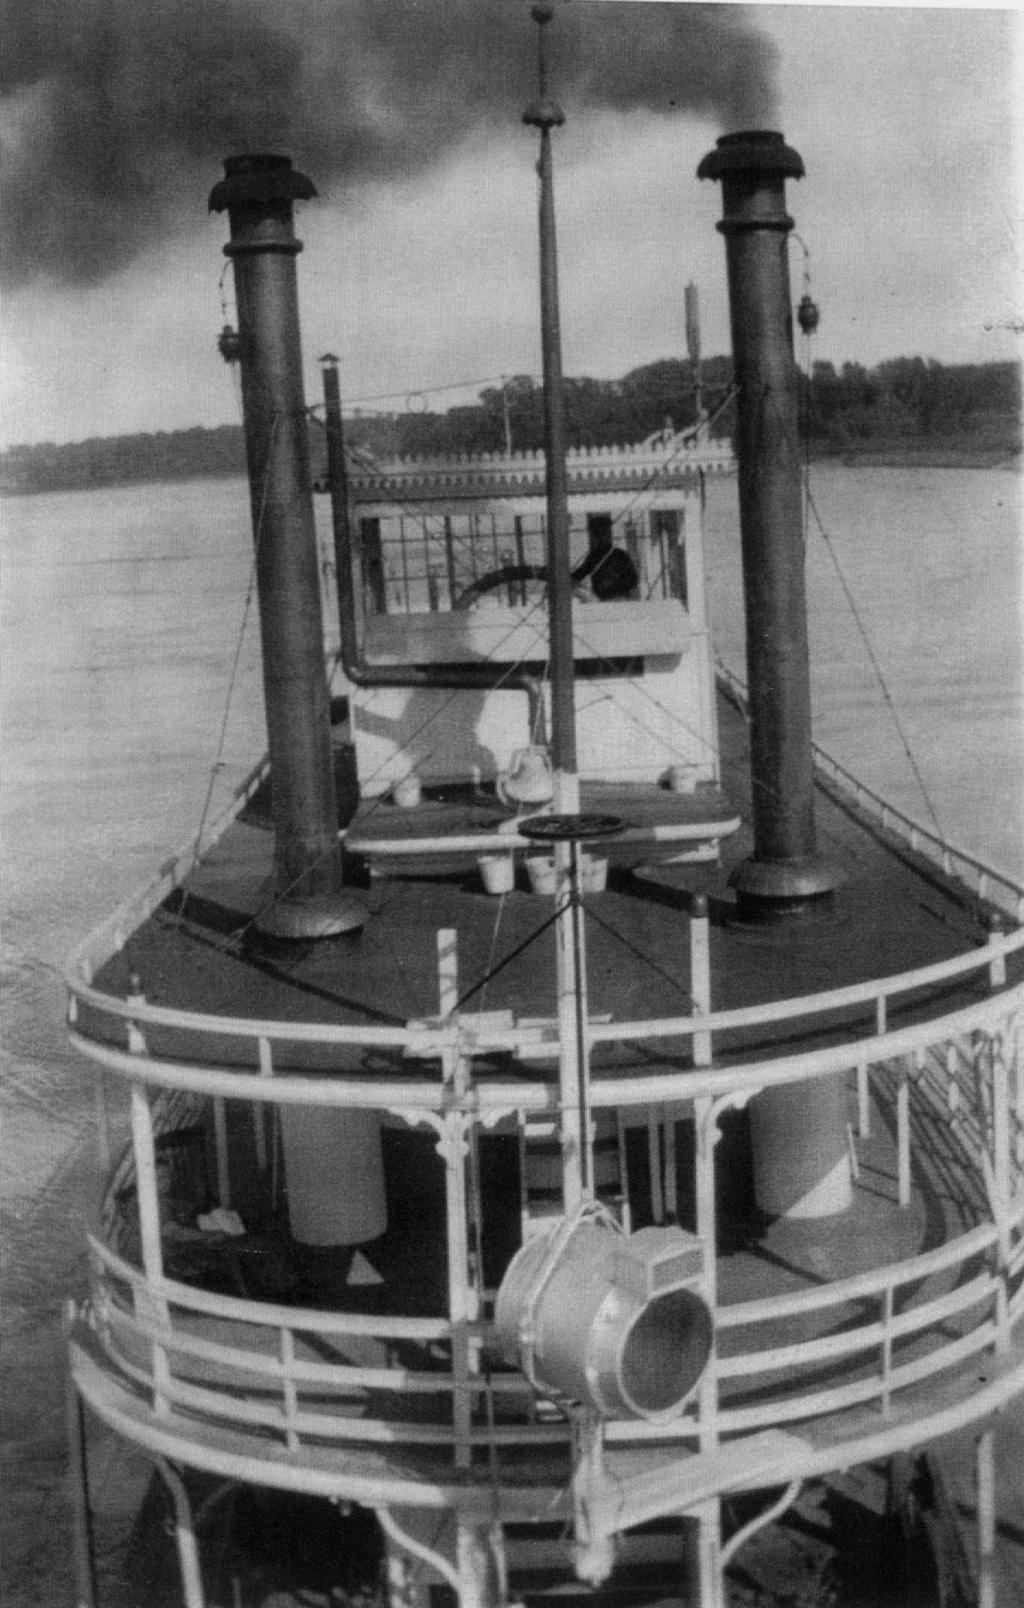 Following are two pictures of the tug boat Daniel Boone taken at the Washington, Missouri Landing. Copies of these pictures were given to me by Marc Houseman, Director, Washington (MO) Museum.